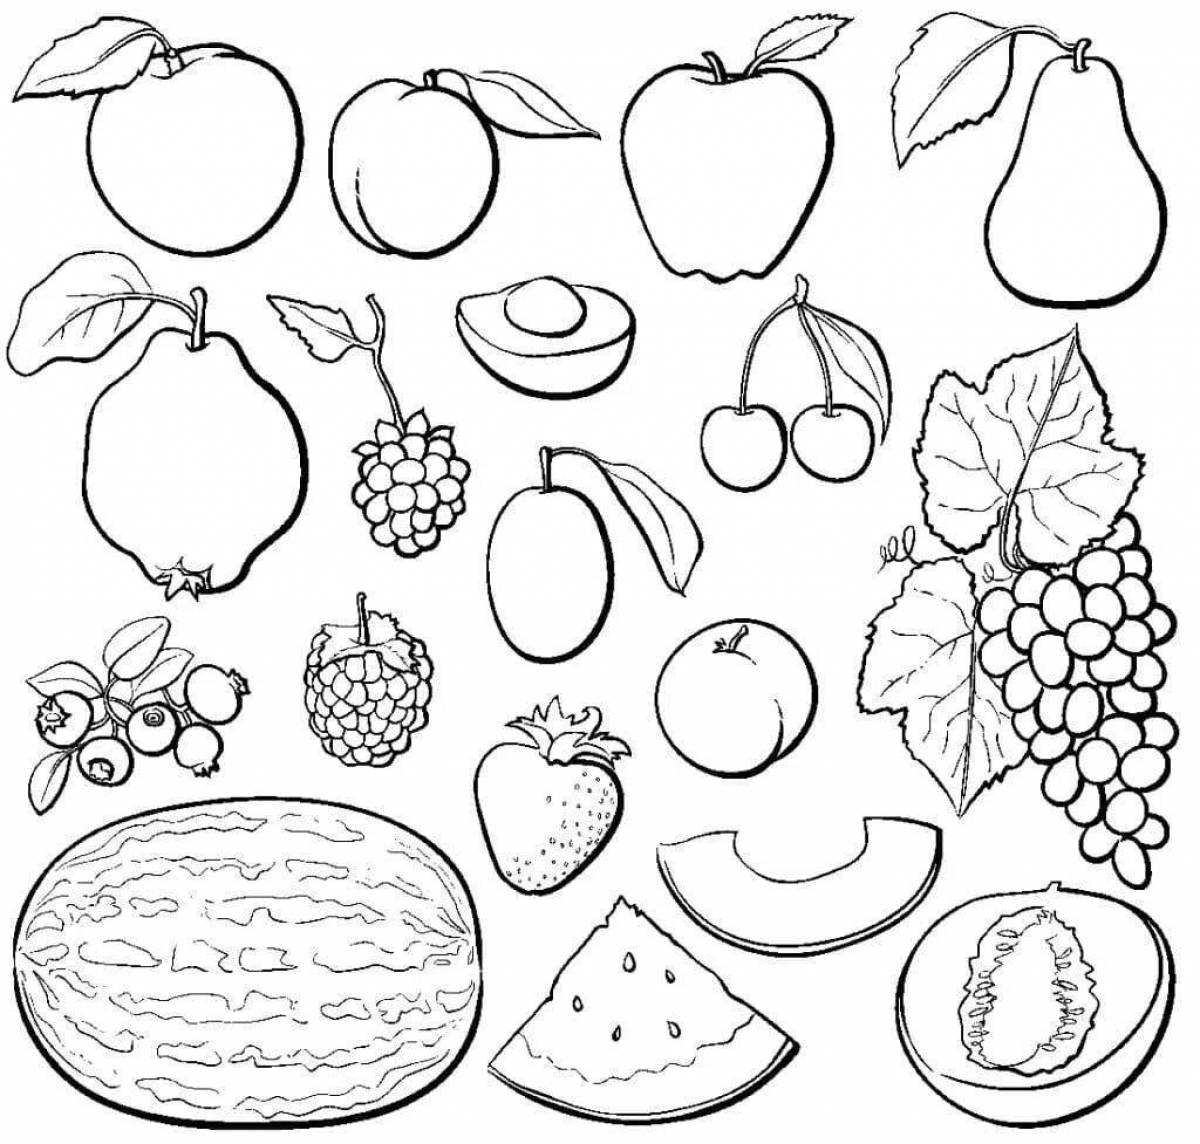 Adorable fruit and vegetable coloring book